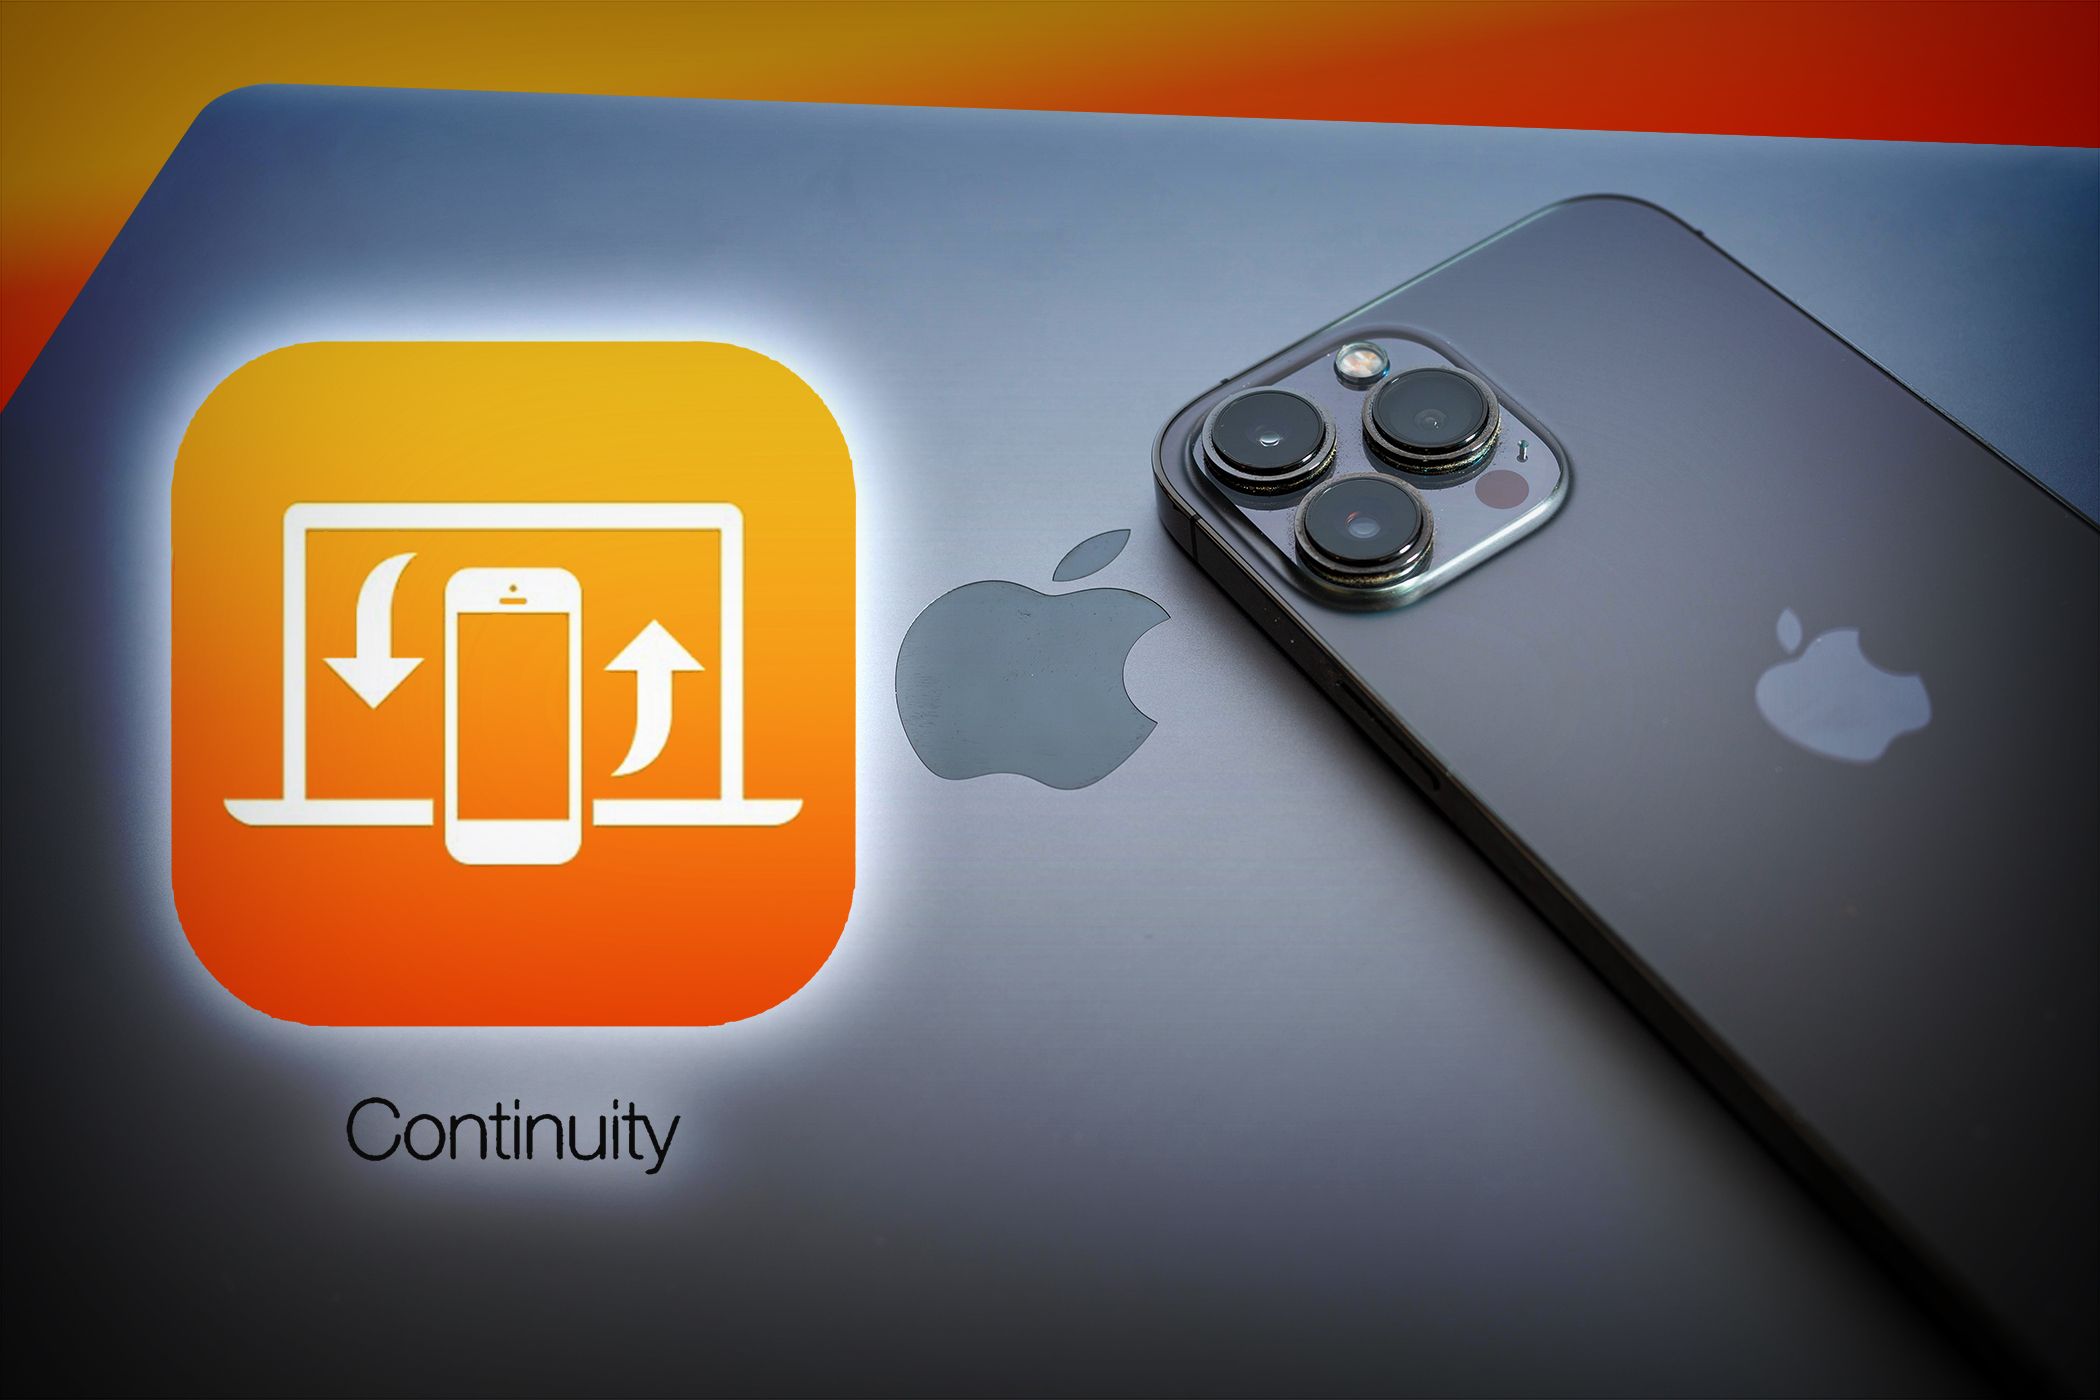 Apple Handoff feature icon next to a MacBook and iPhone, showcasing seamless integration between Apple devices.